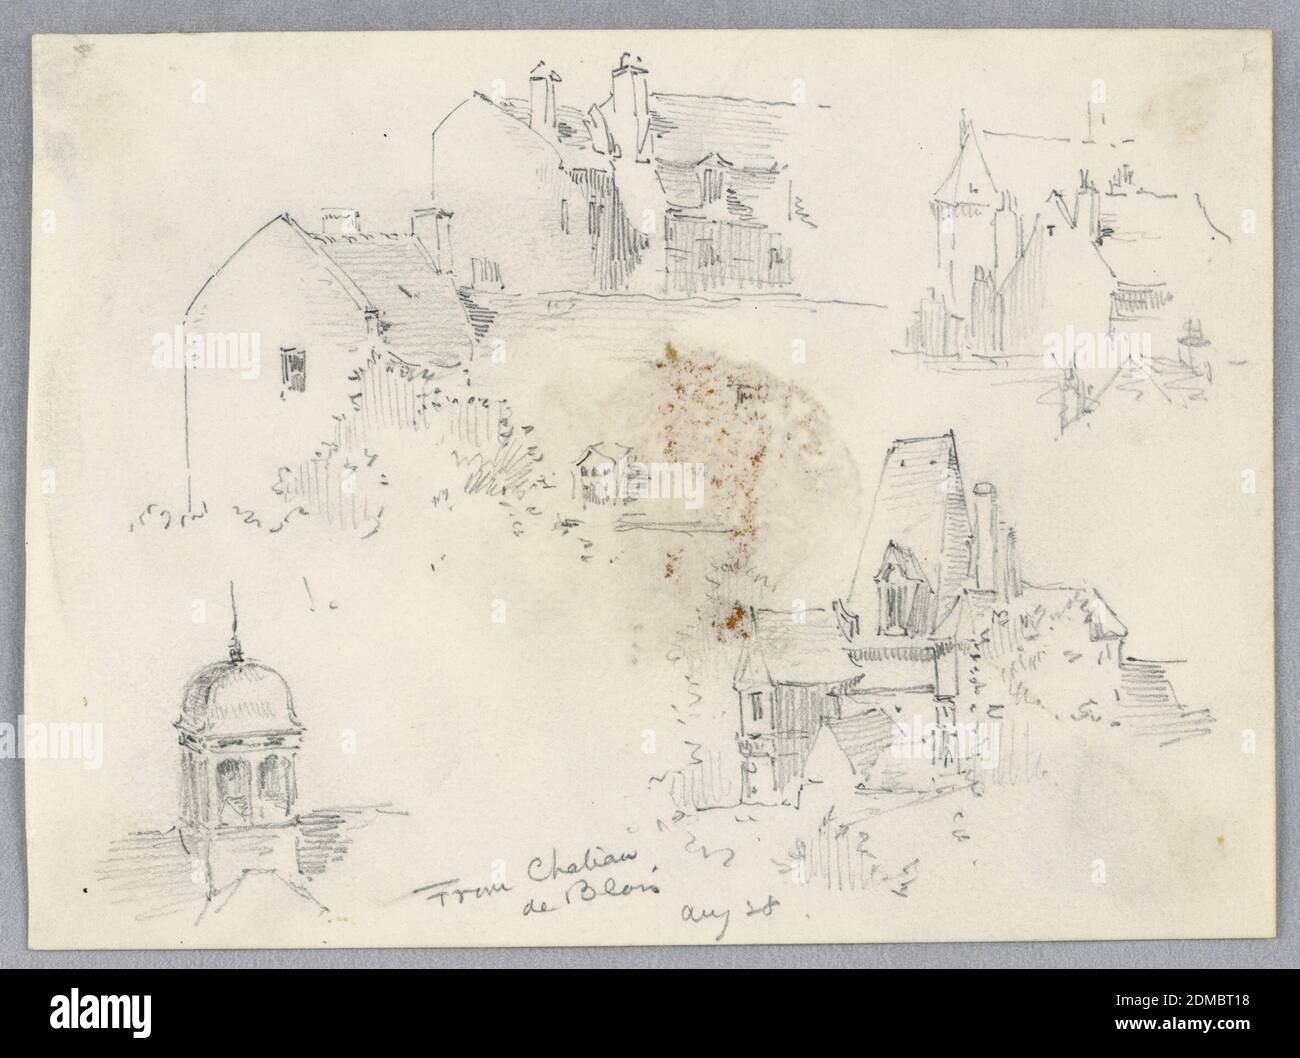 Sketches from Château de Blois, Arnold William Brunner, American, 1857–1925, Graphite on paper, Sketches of buildings, rooftops with chimneys, lower right, Victorian-era house., USA, 1883, architecture, Drawing Stock Photo